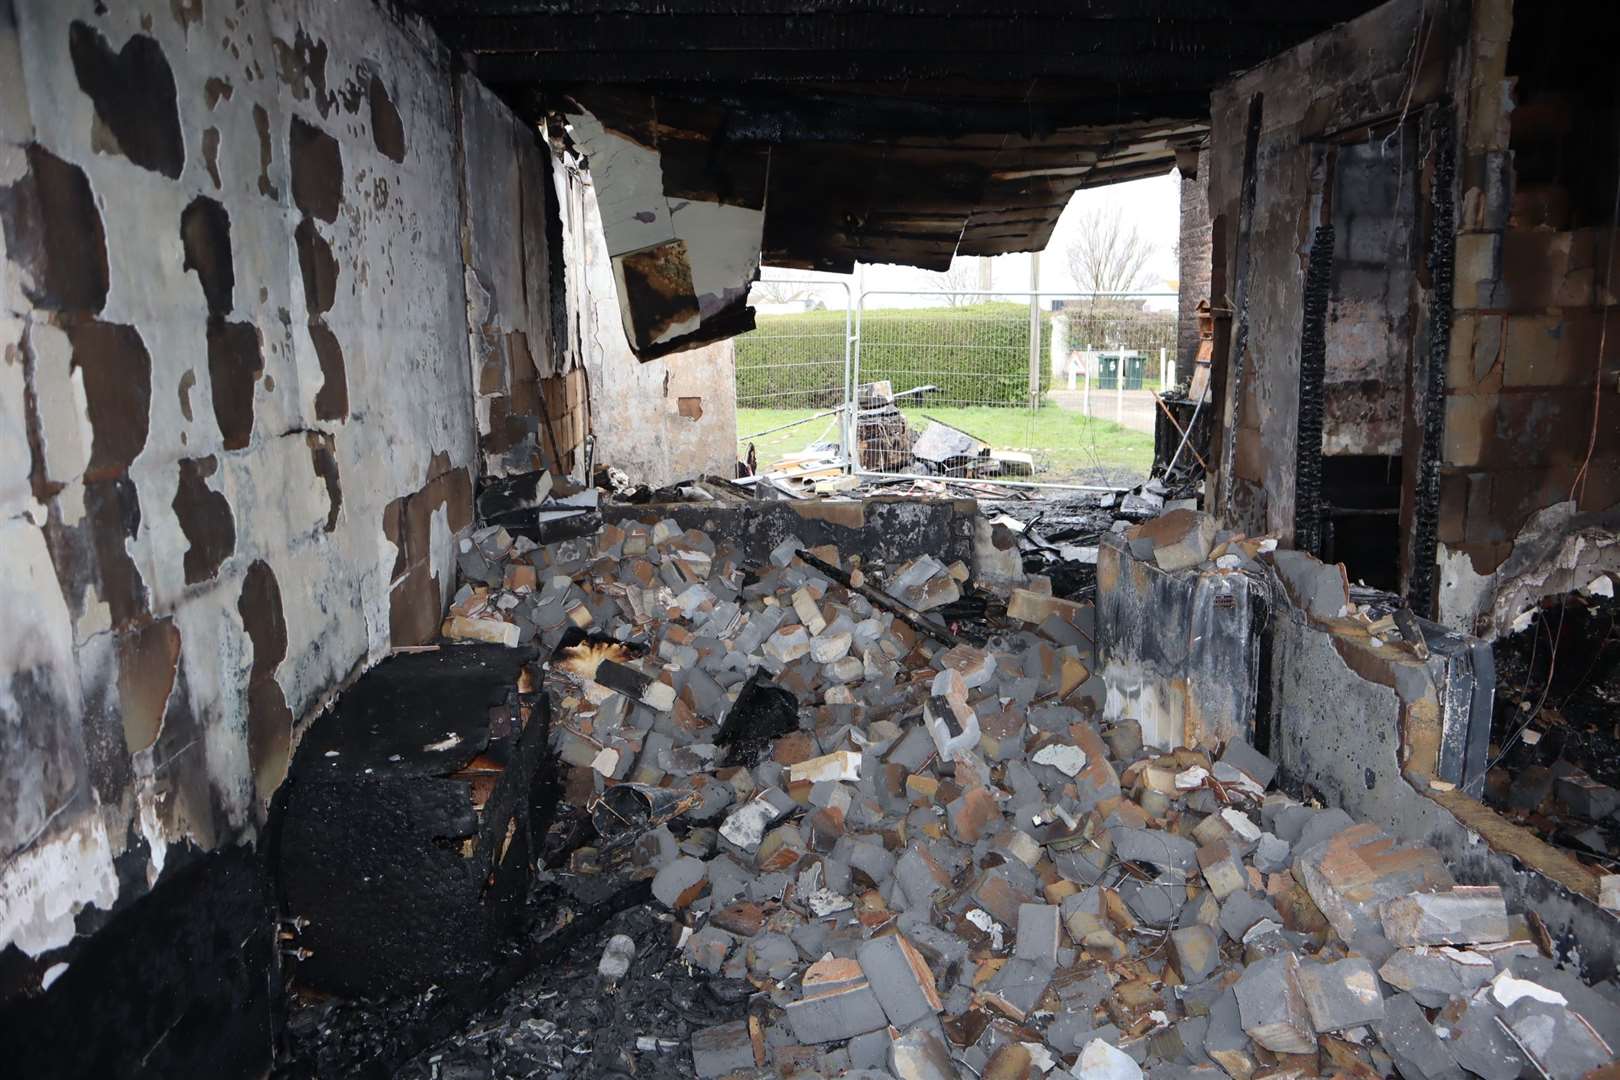 All that remains of Deni Kerswell's bedroom after the chalet fire in Leysdown, Sheppey